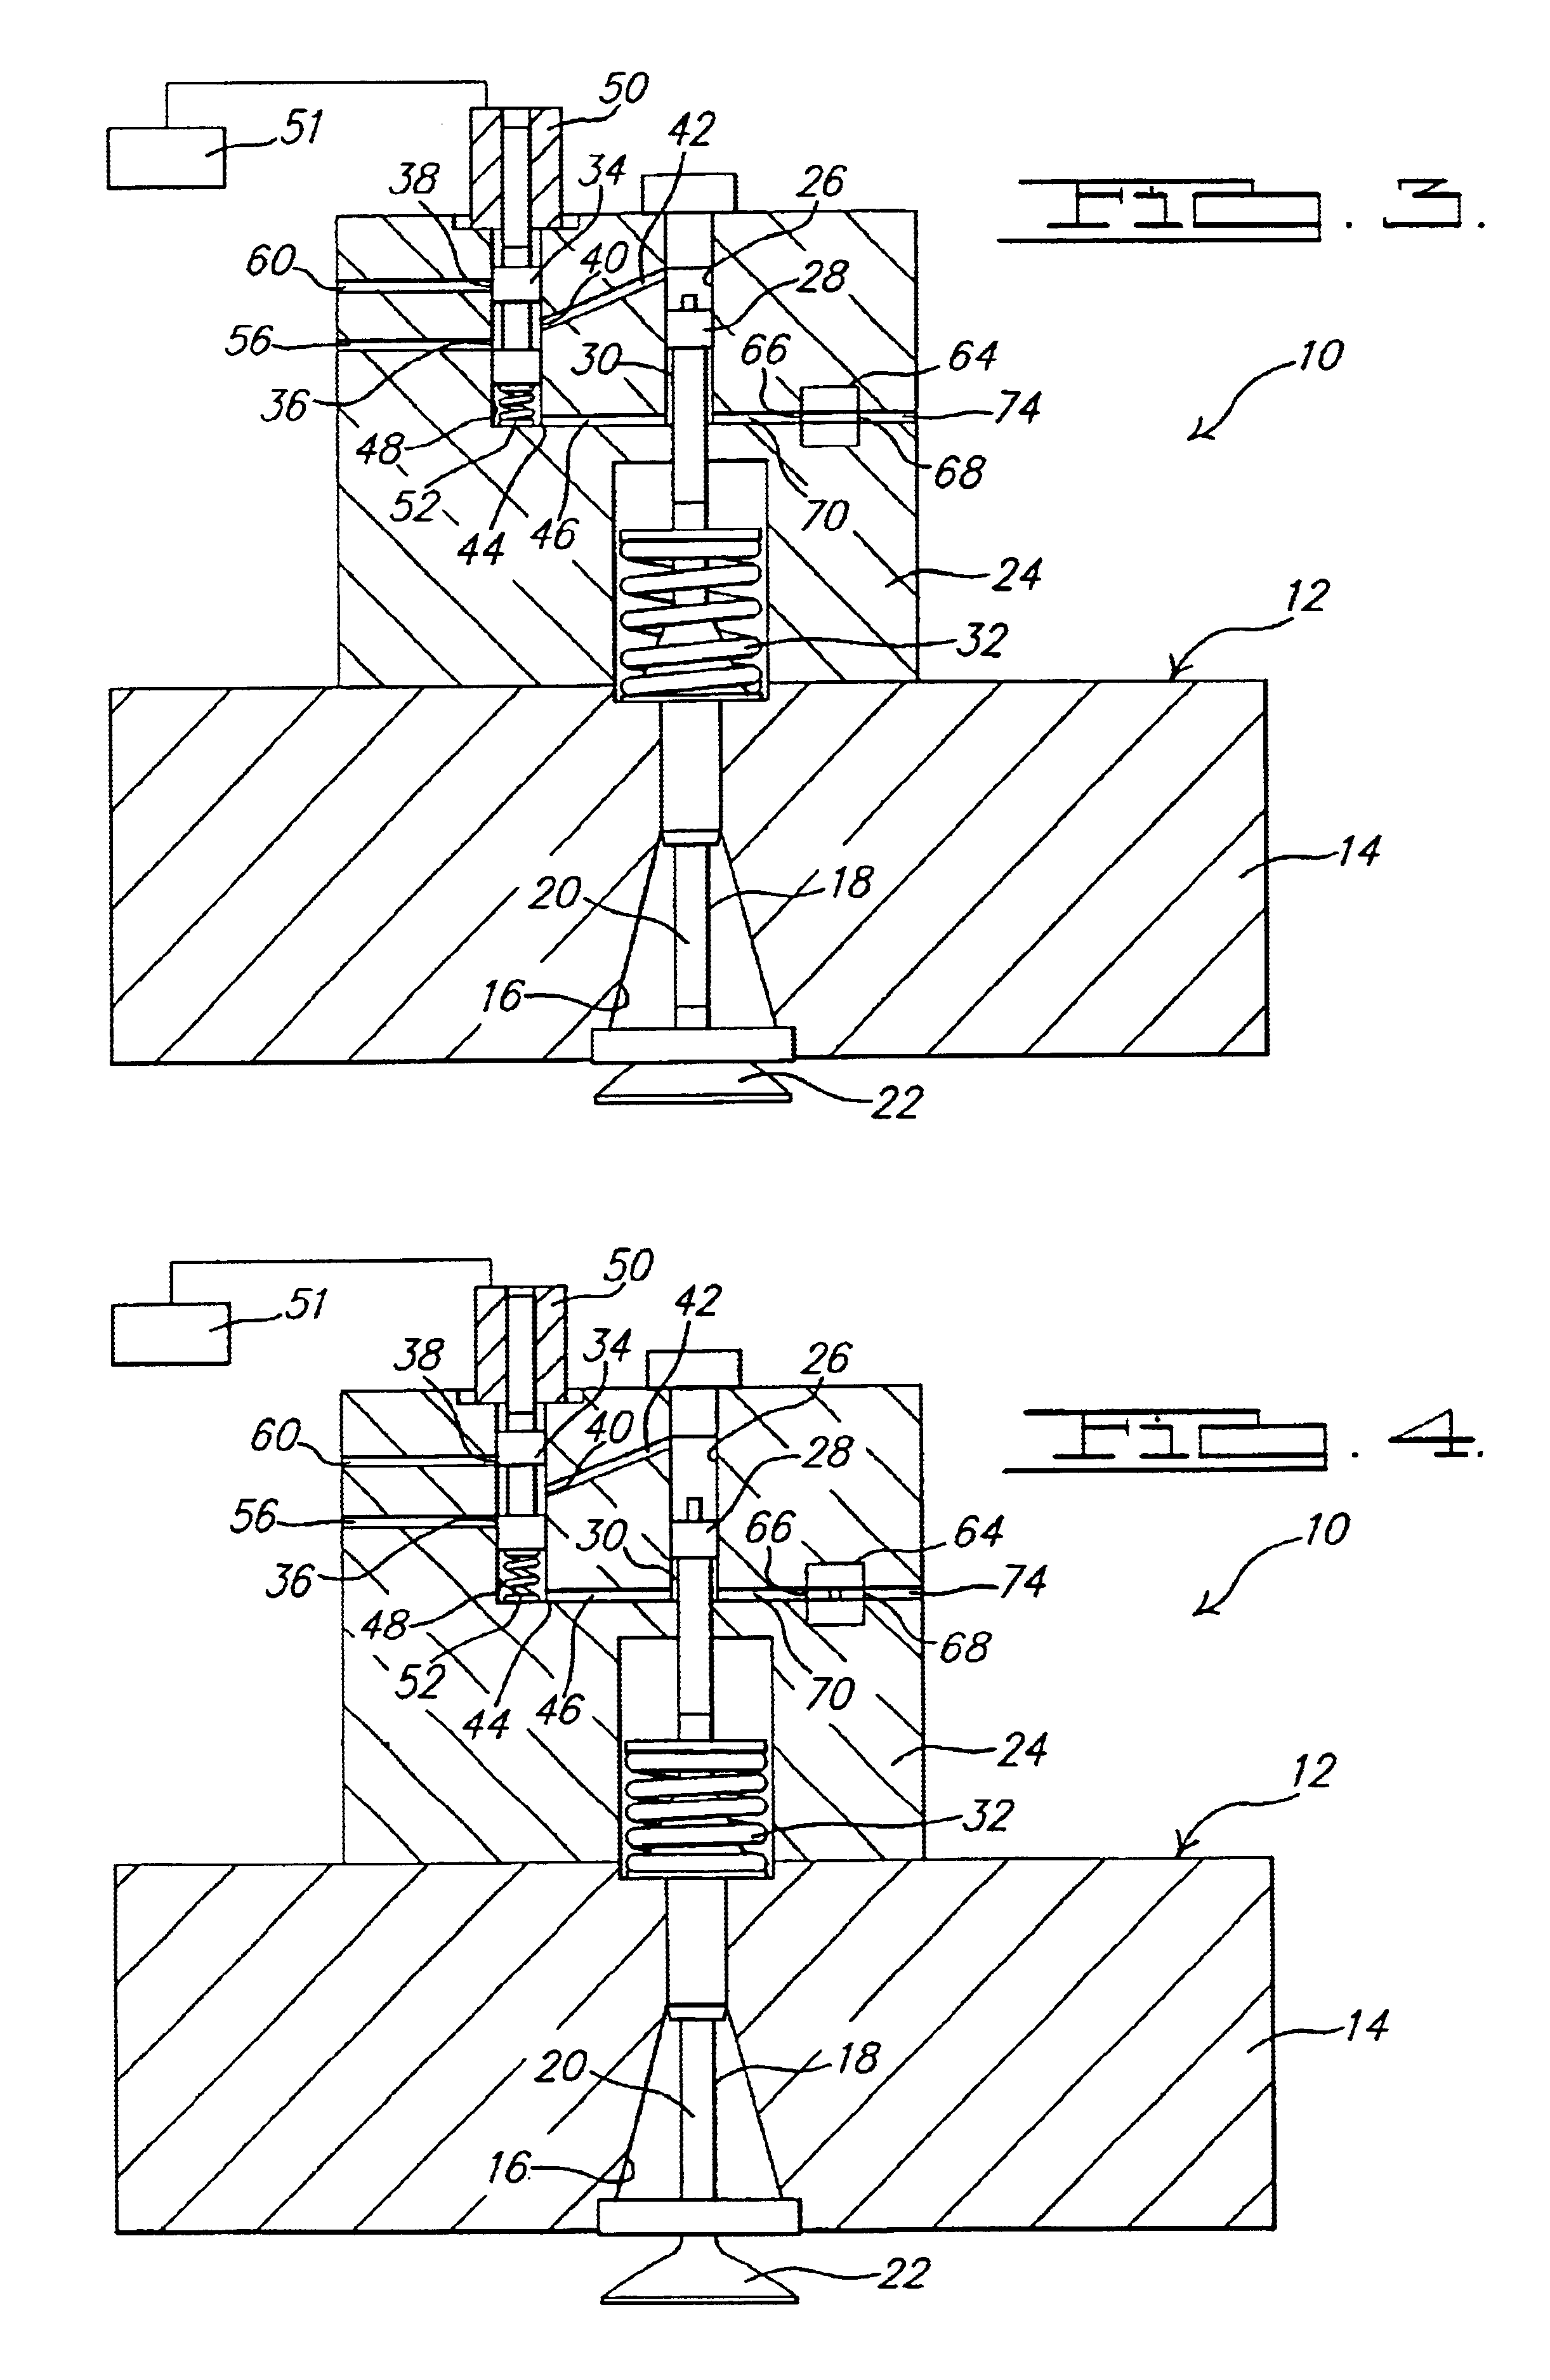 Engine valve actuator assembly with hydraulic feedback